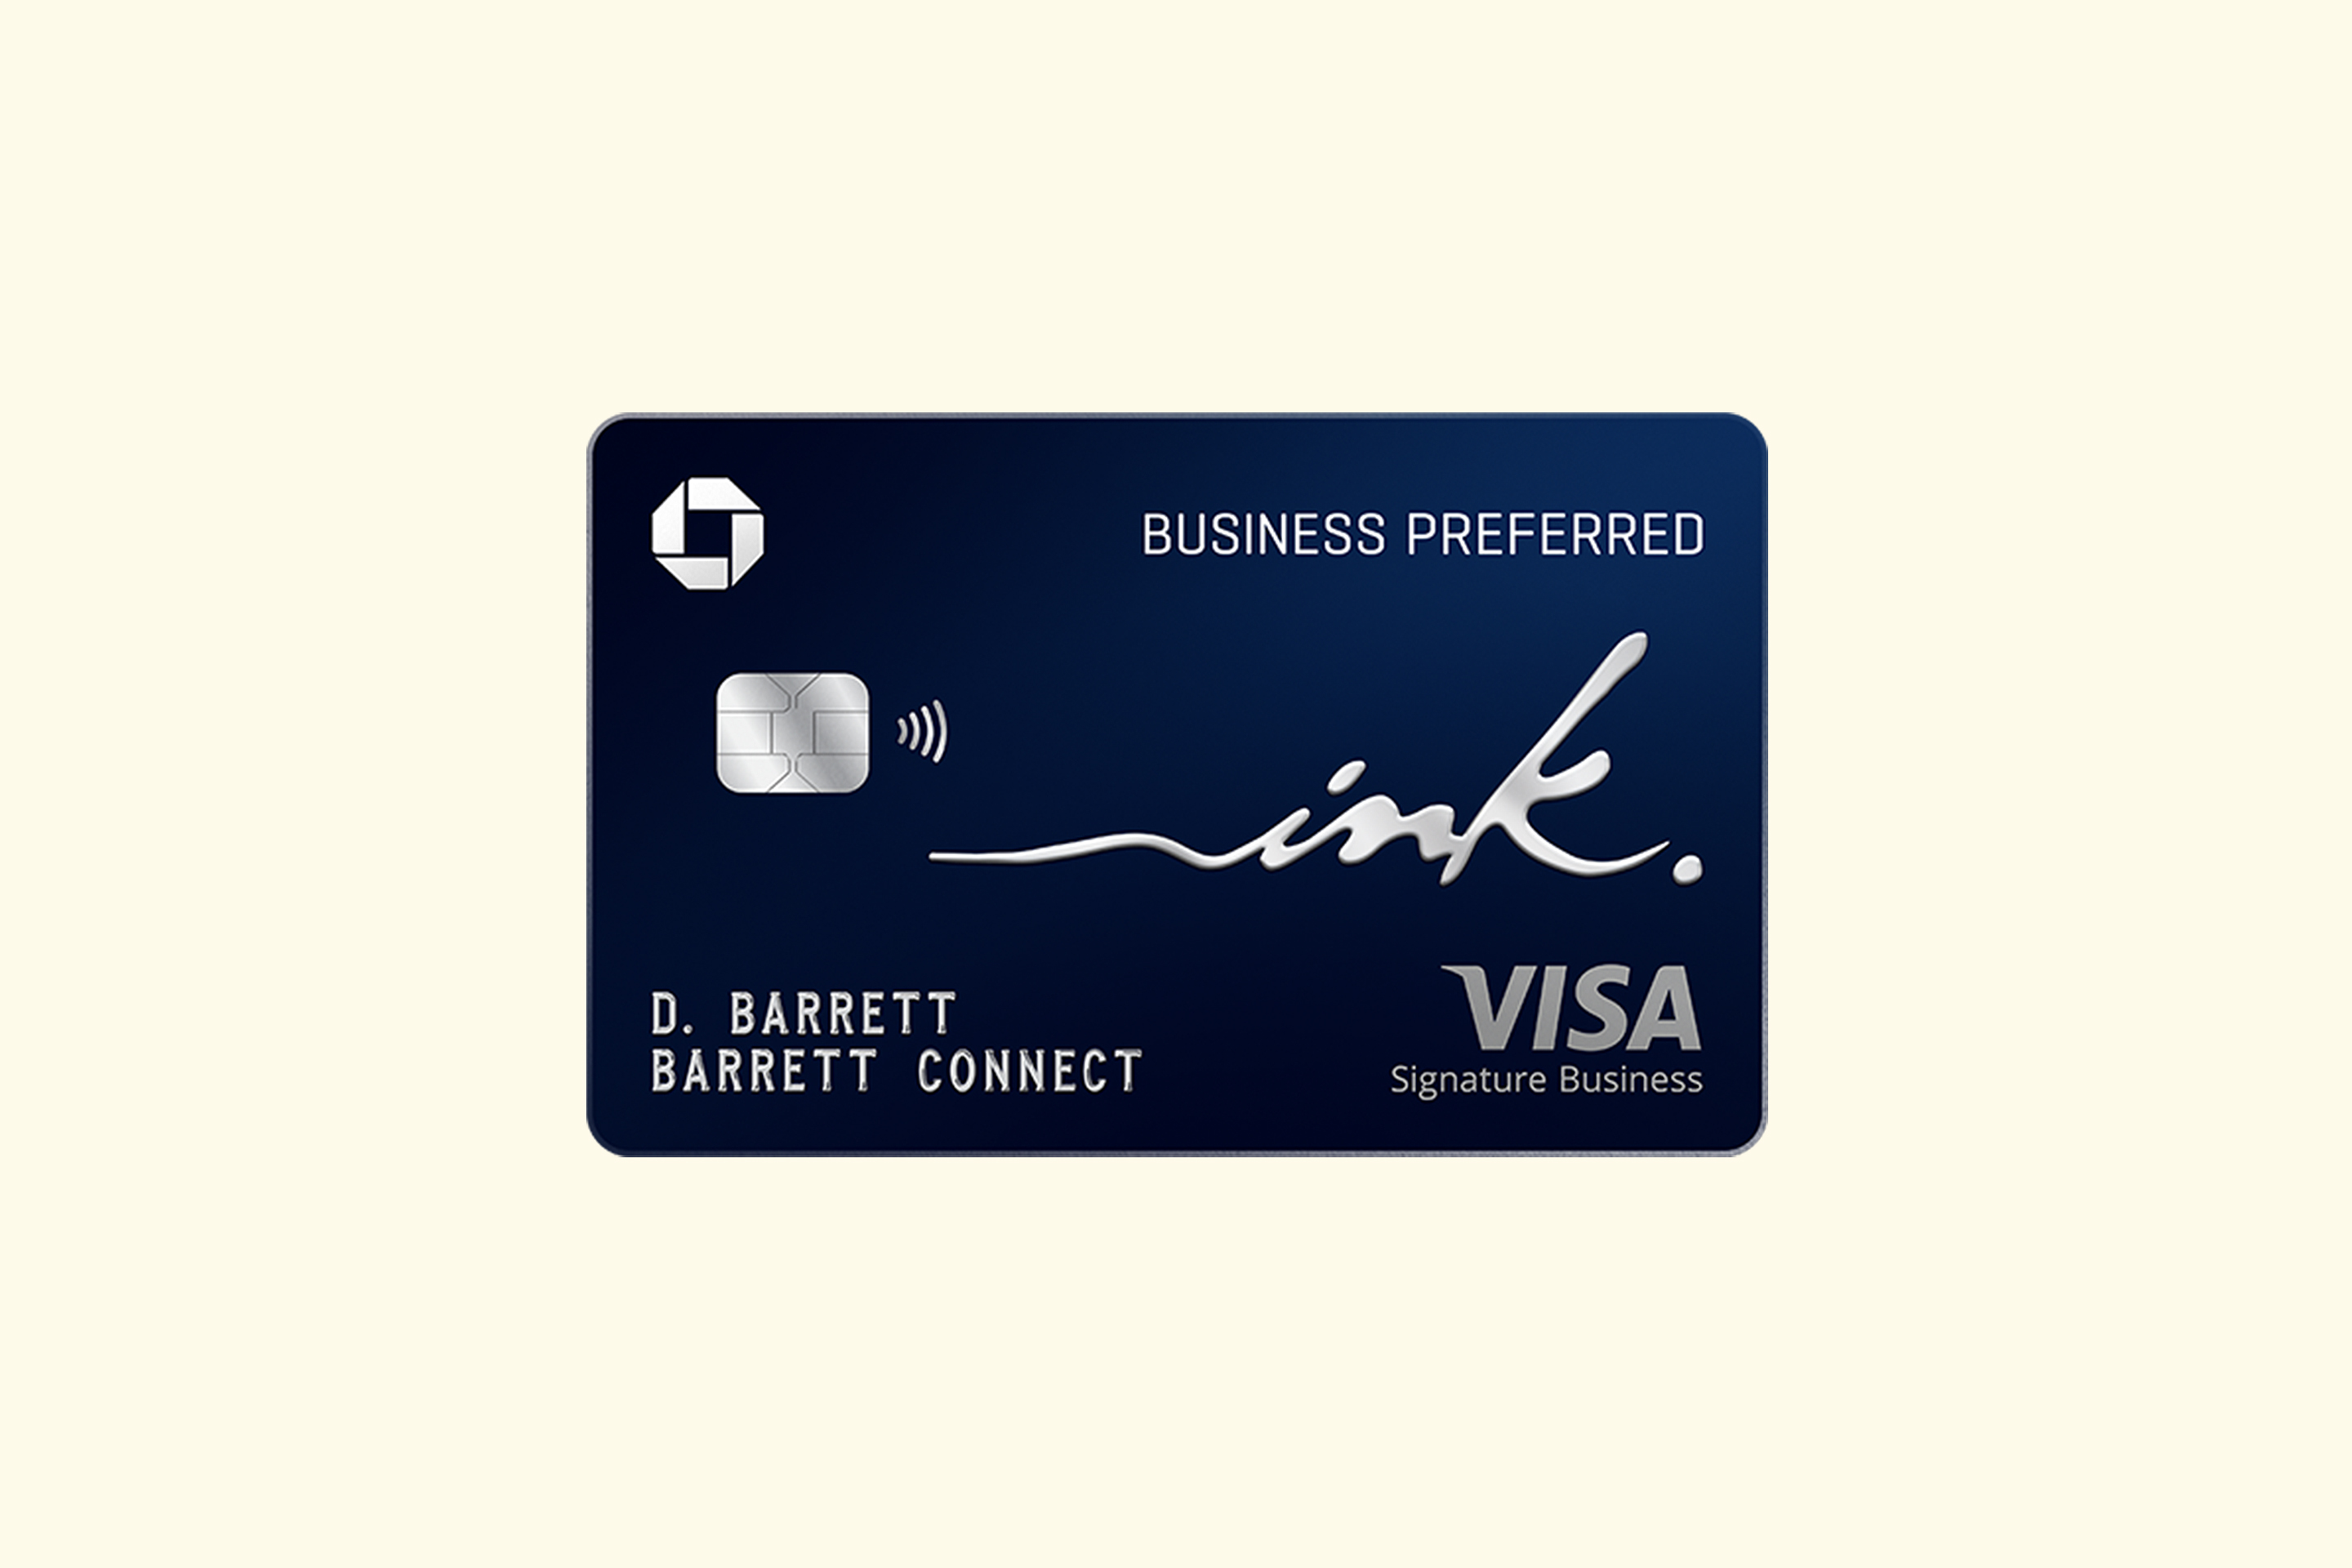 Chase Business Ink Preferred Credit Card